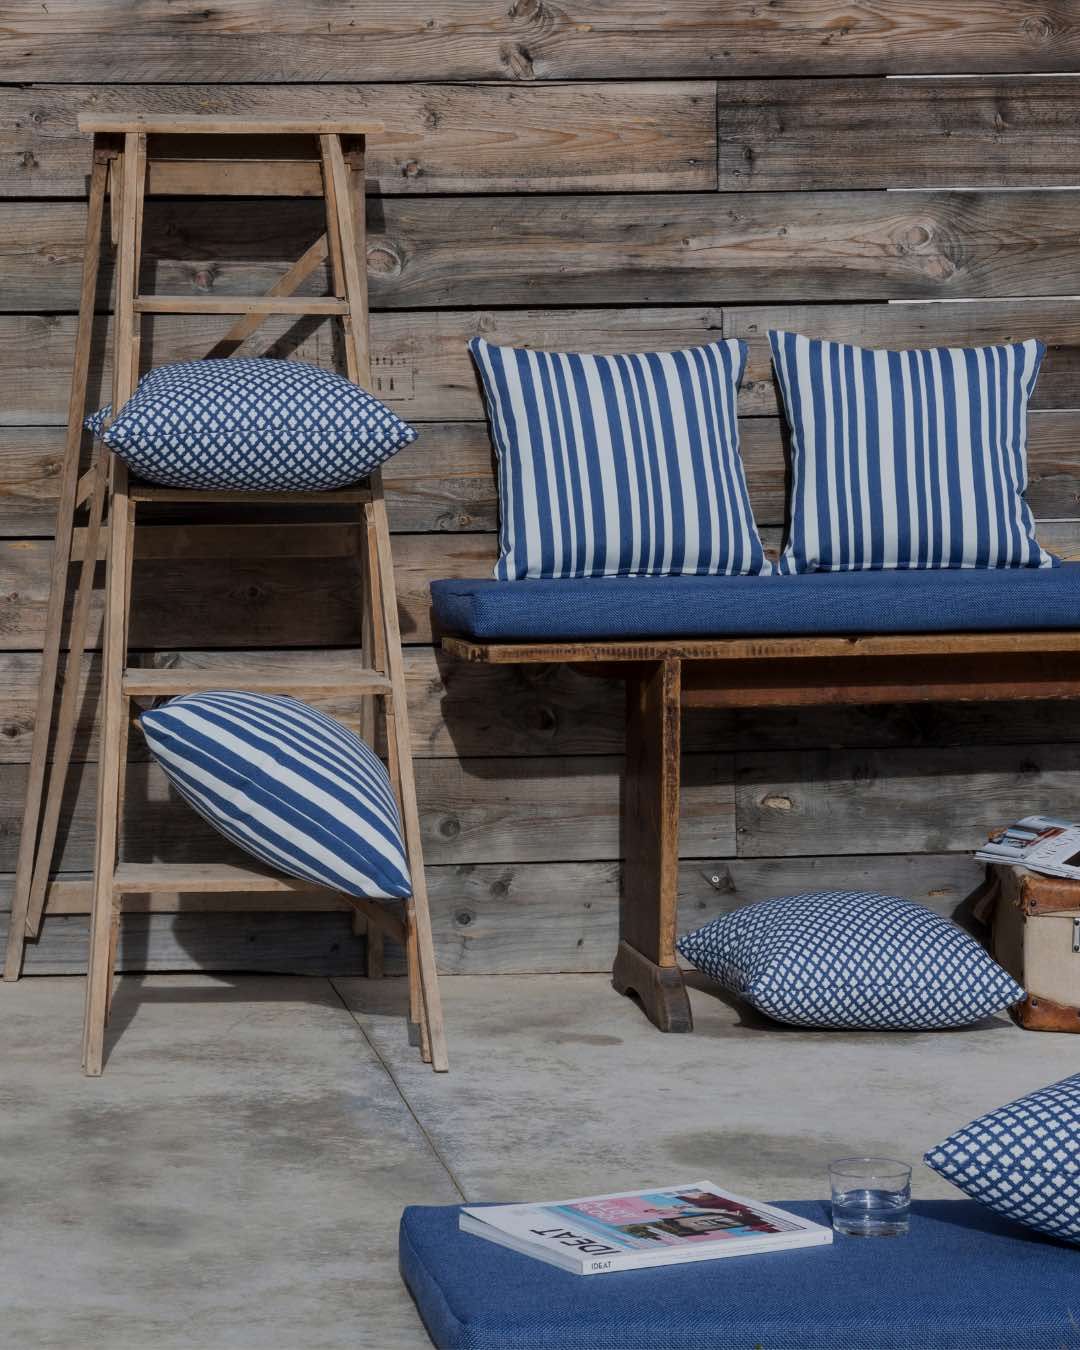 Outdoor upholstery textiles